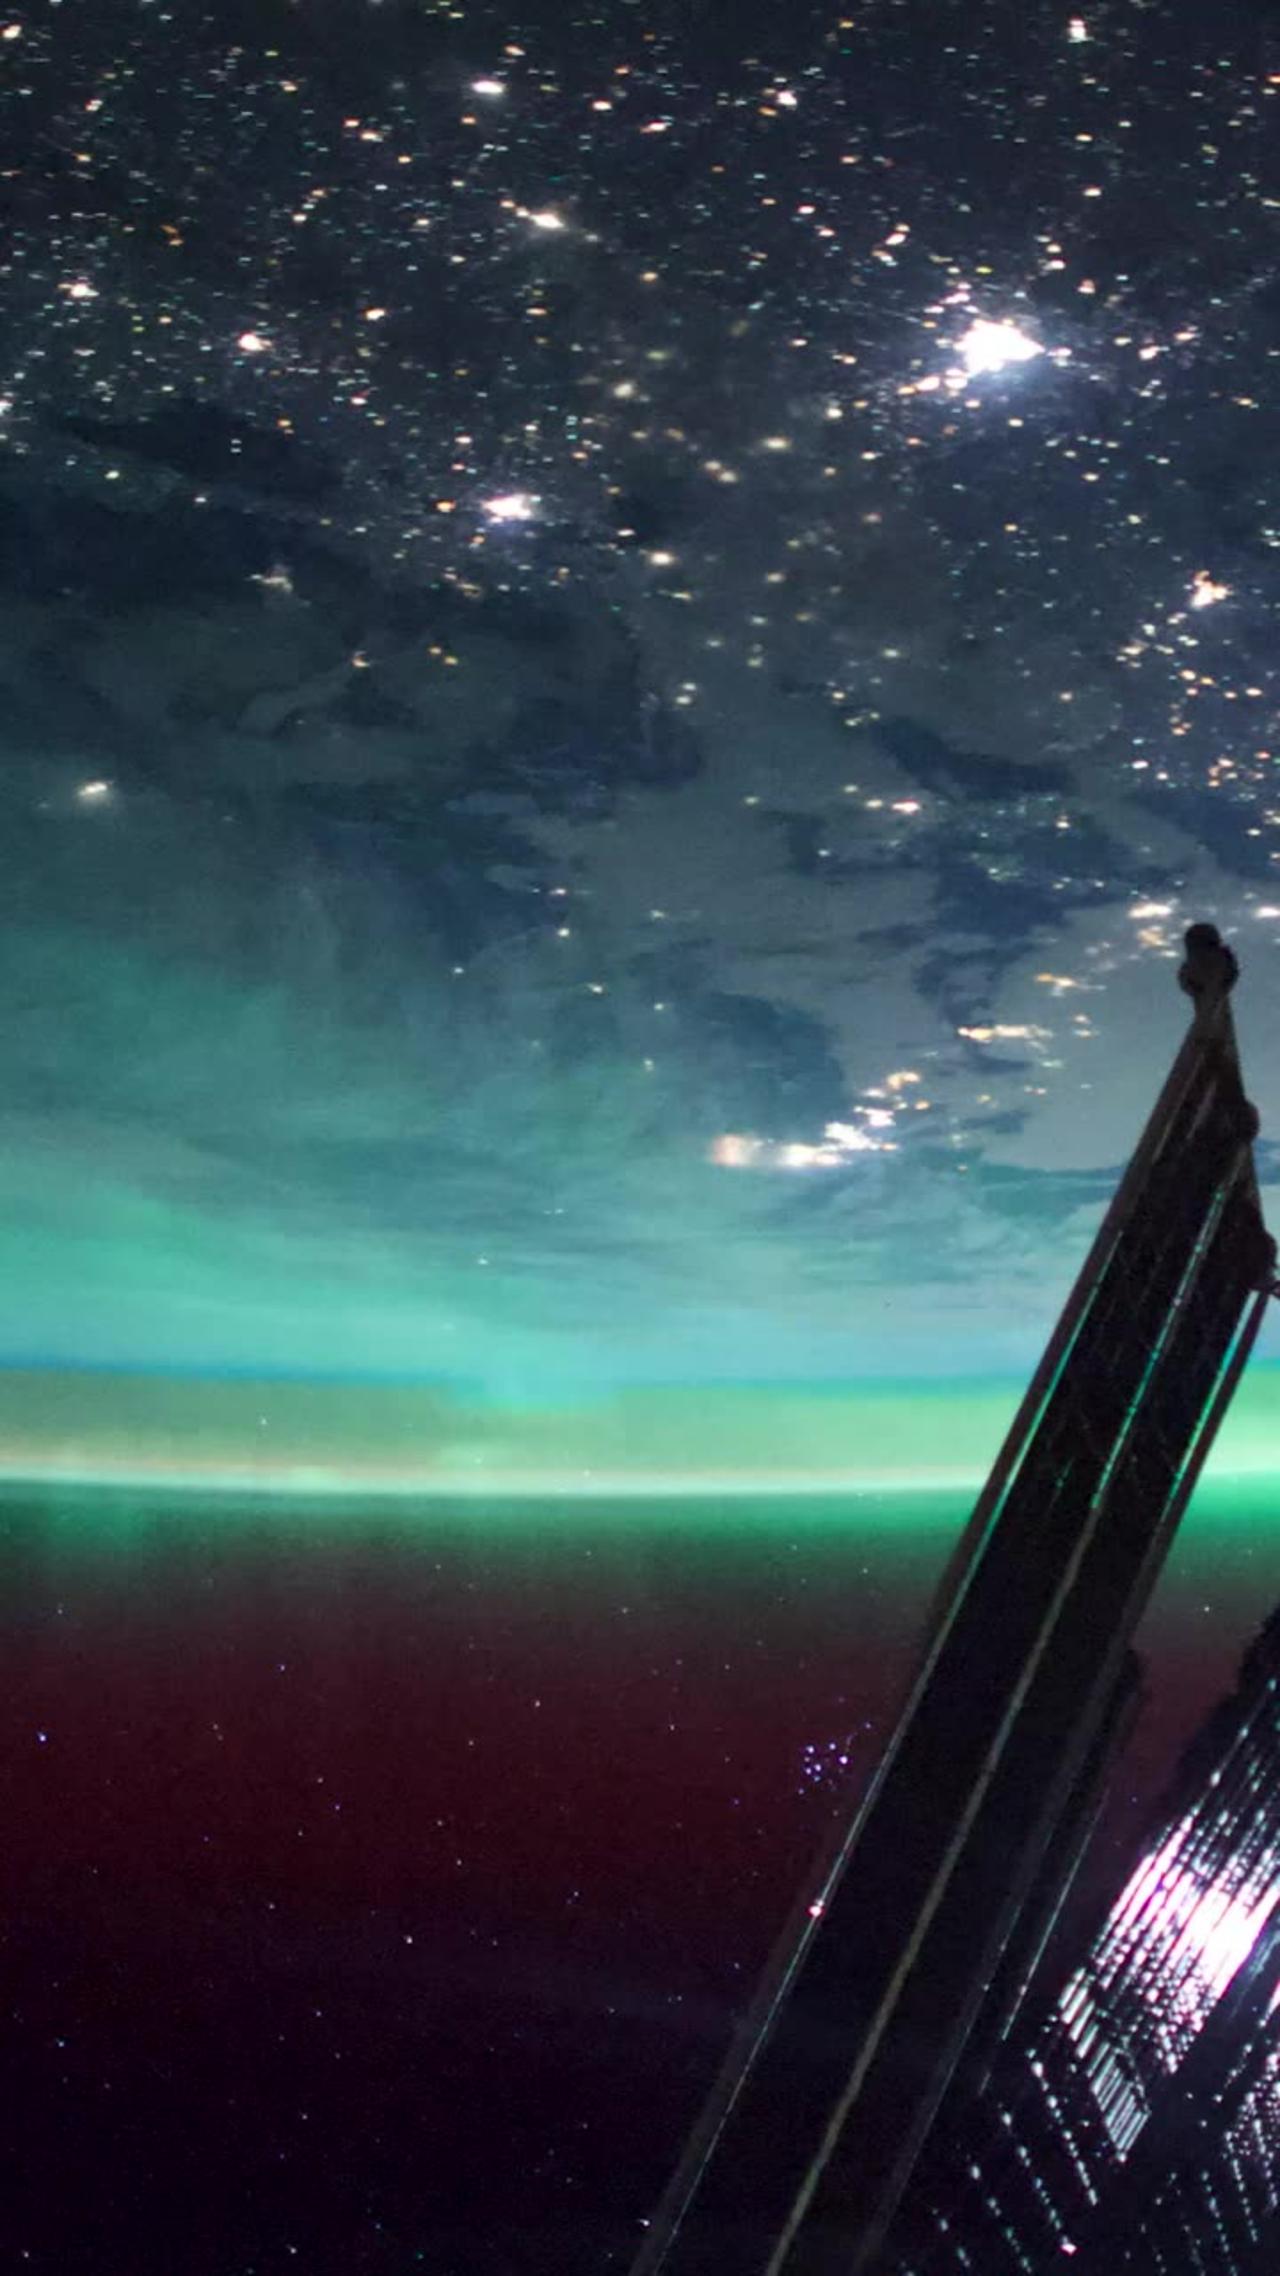 Northern lights seen from the international space stations